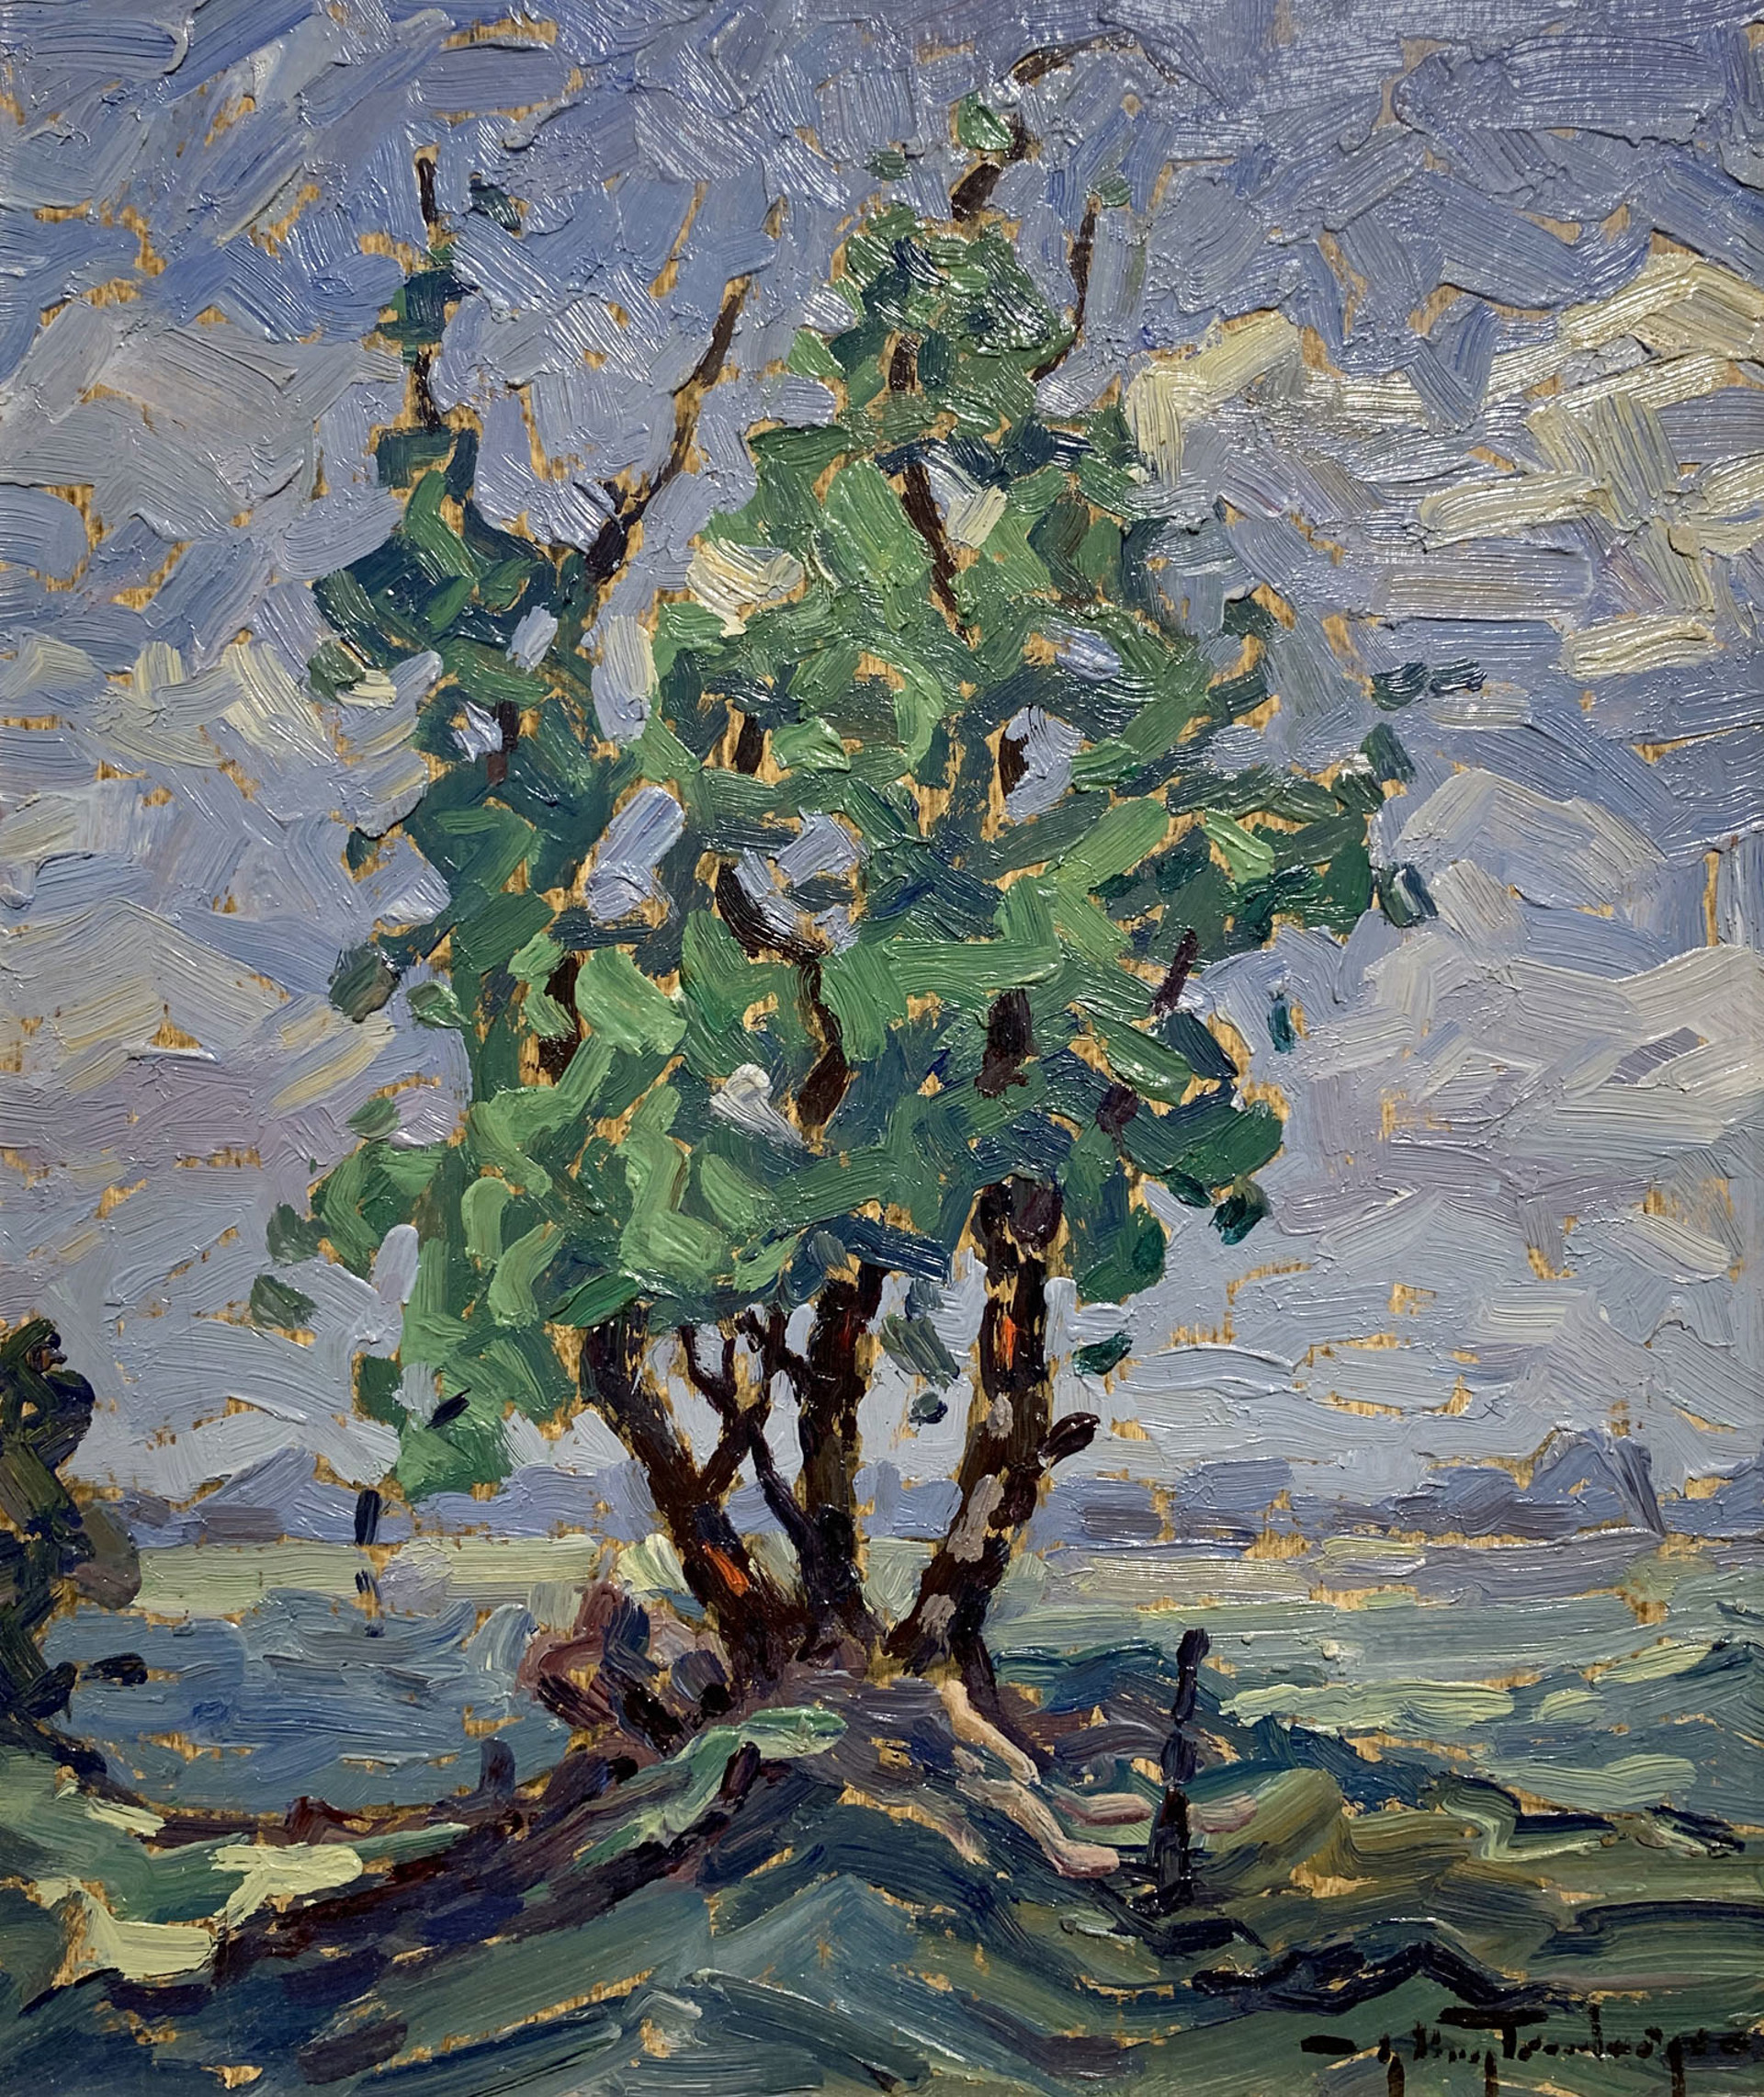 Lonely Tree by George Buytendorp (1923-2014)